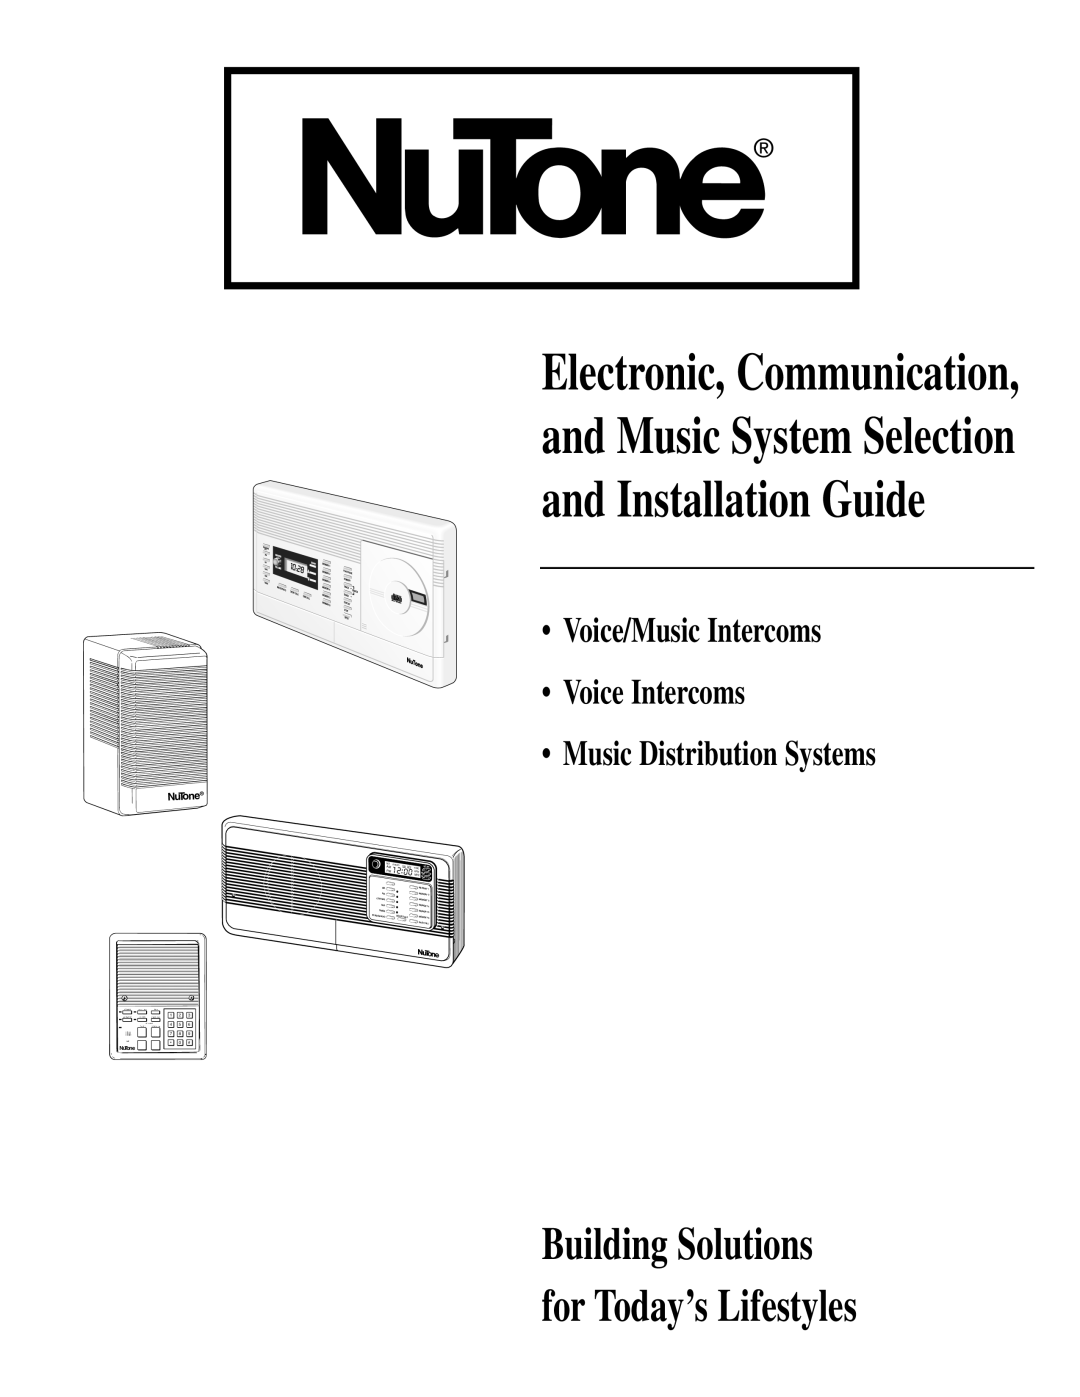 NuTone IM-5000 manual Electronic, Communication, and Installation Guide, and Music System Selection, NuTone, Radio, Scan 